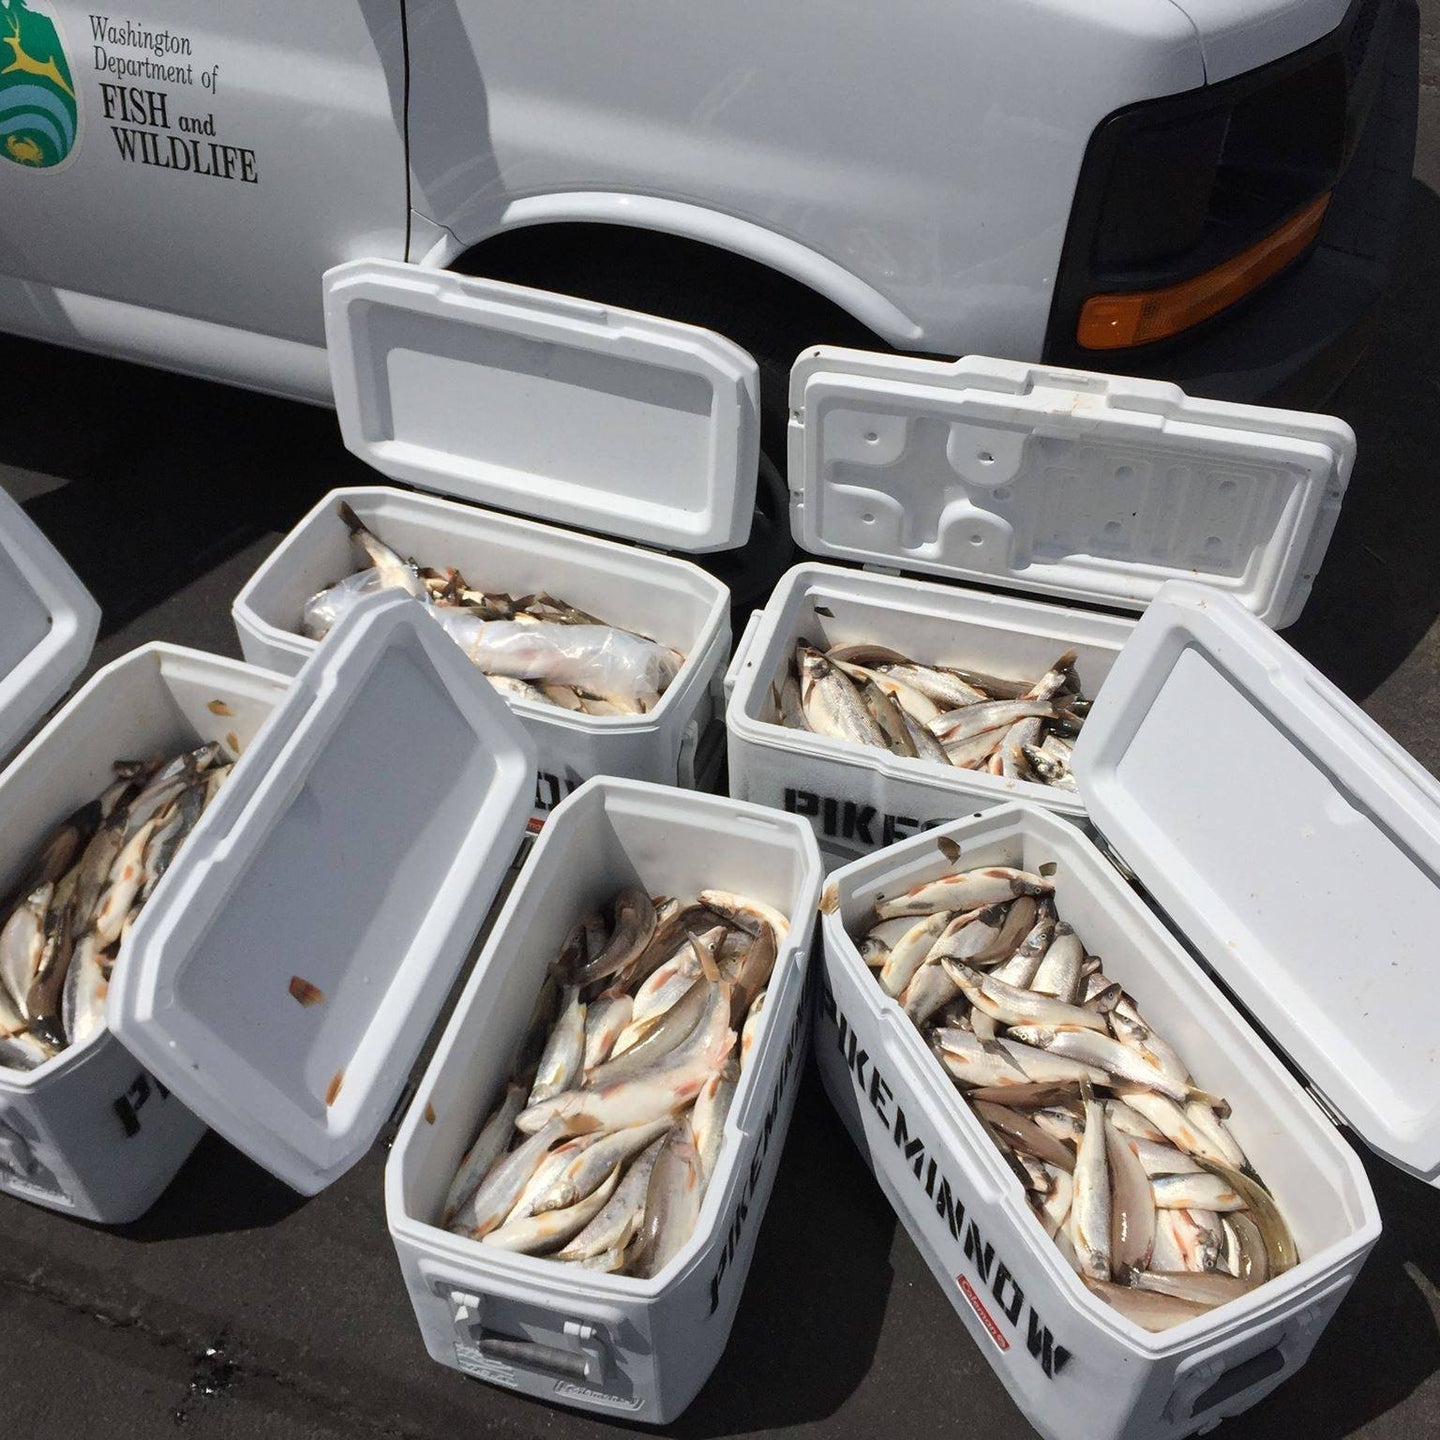 northern pikeminnow in coolers